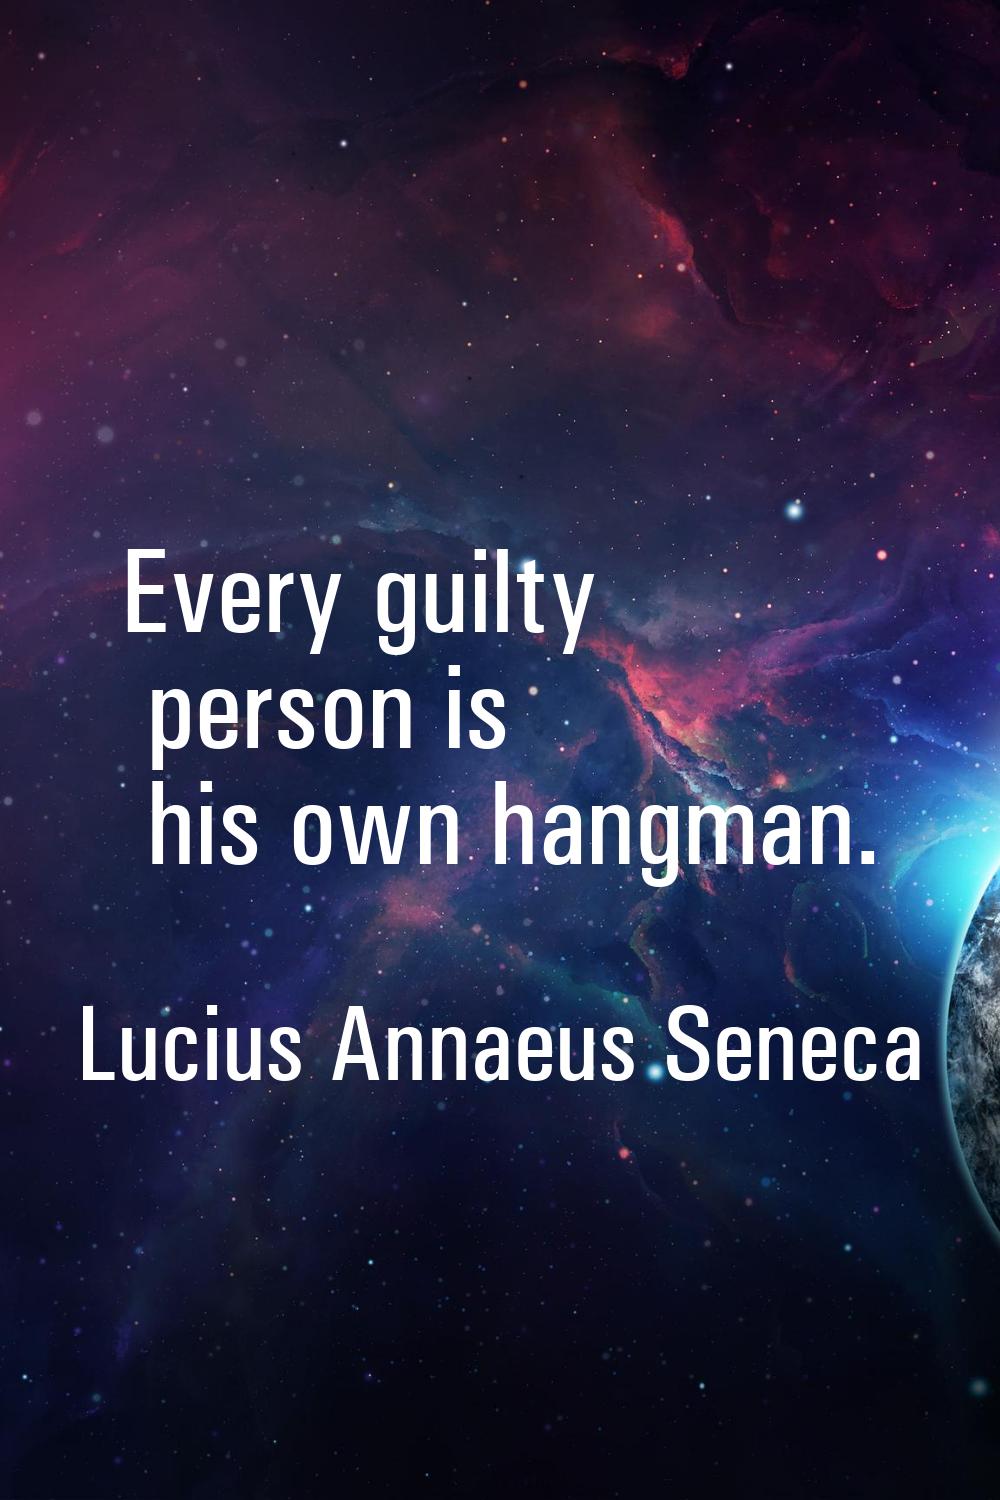 Every guilty person is his own hangman.